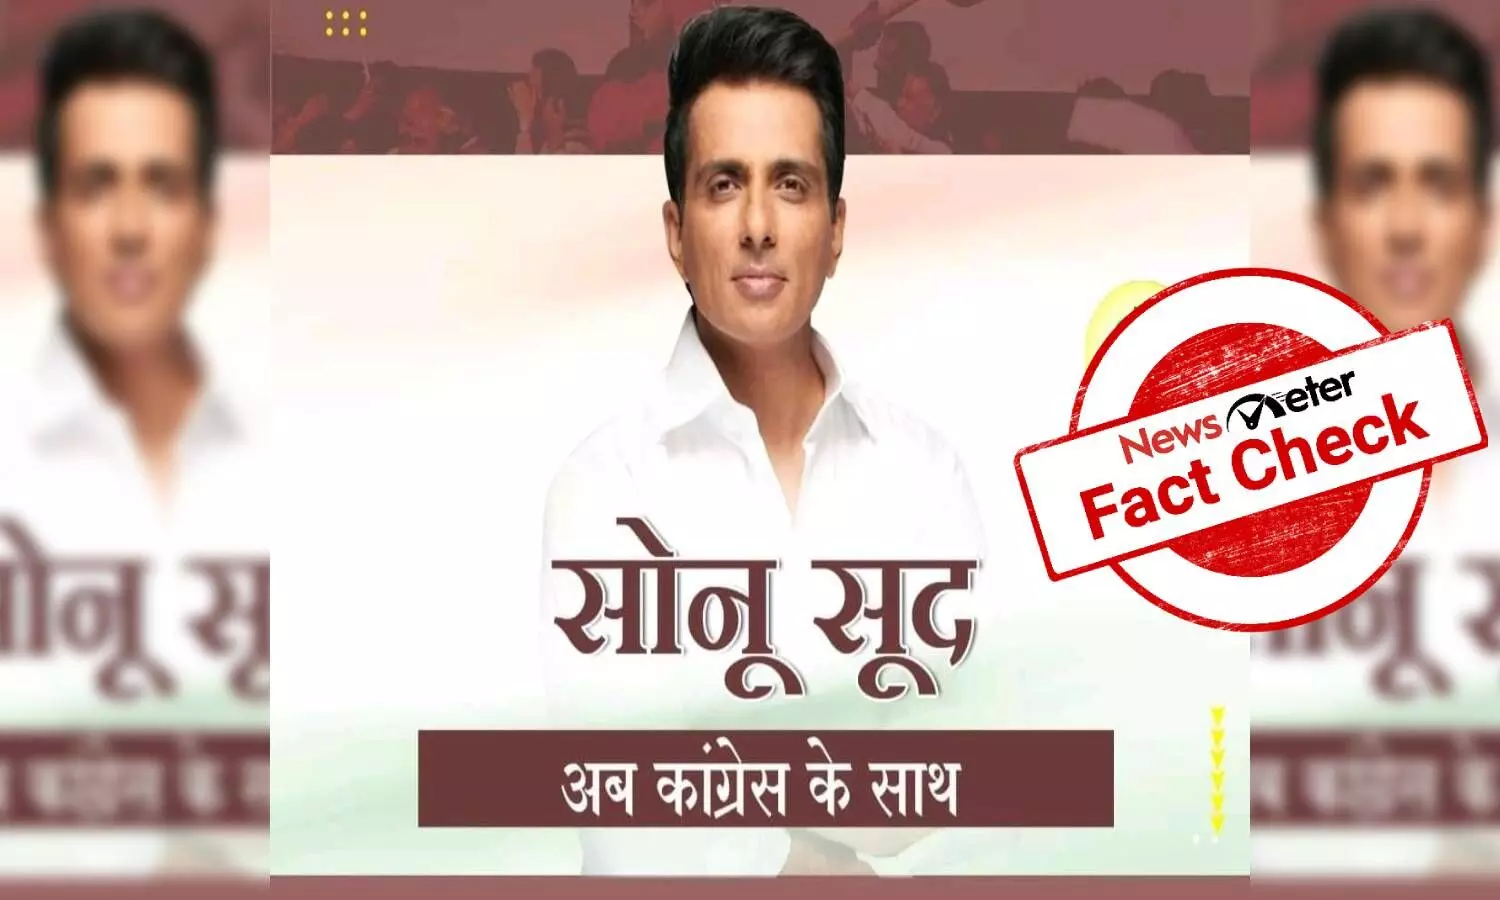 Fact Check: Sonu Sood has not joined Congress, viral claims are false